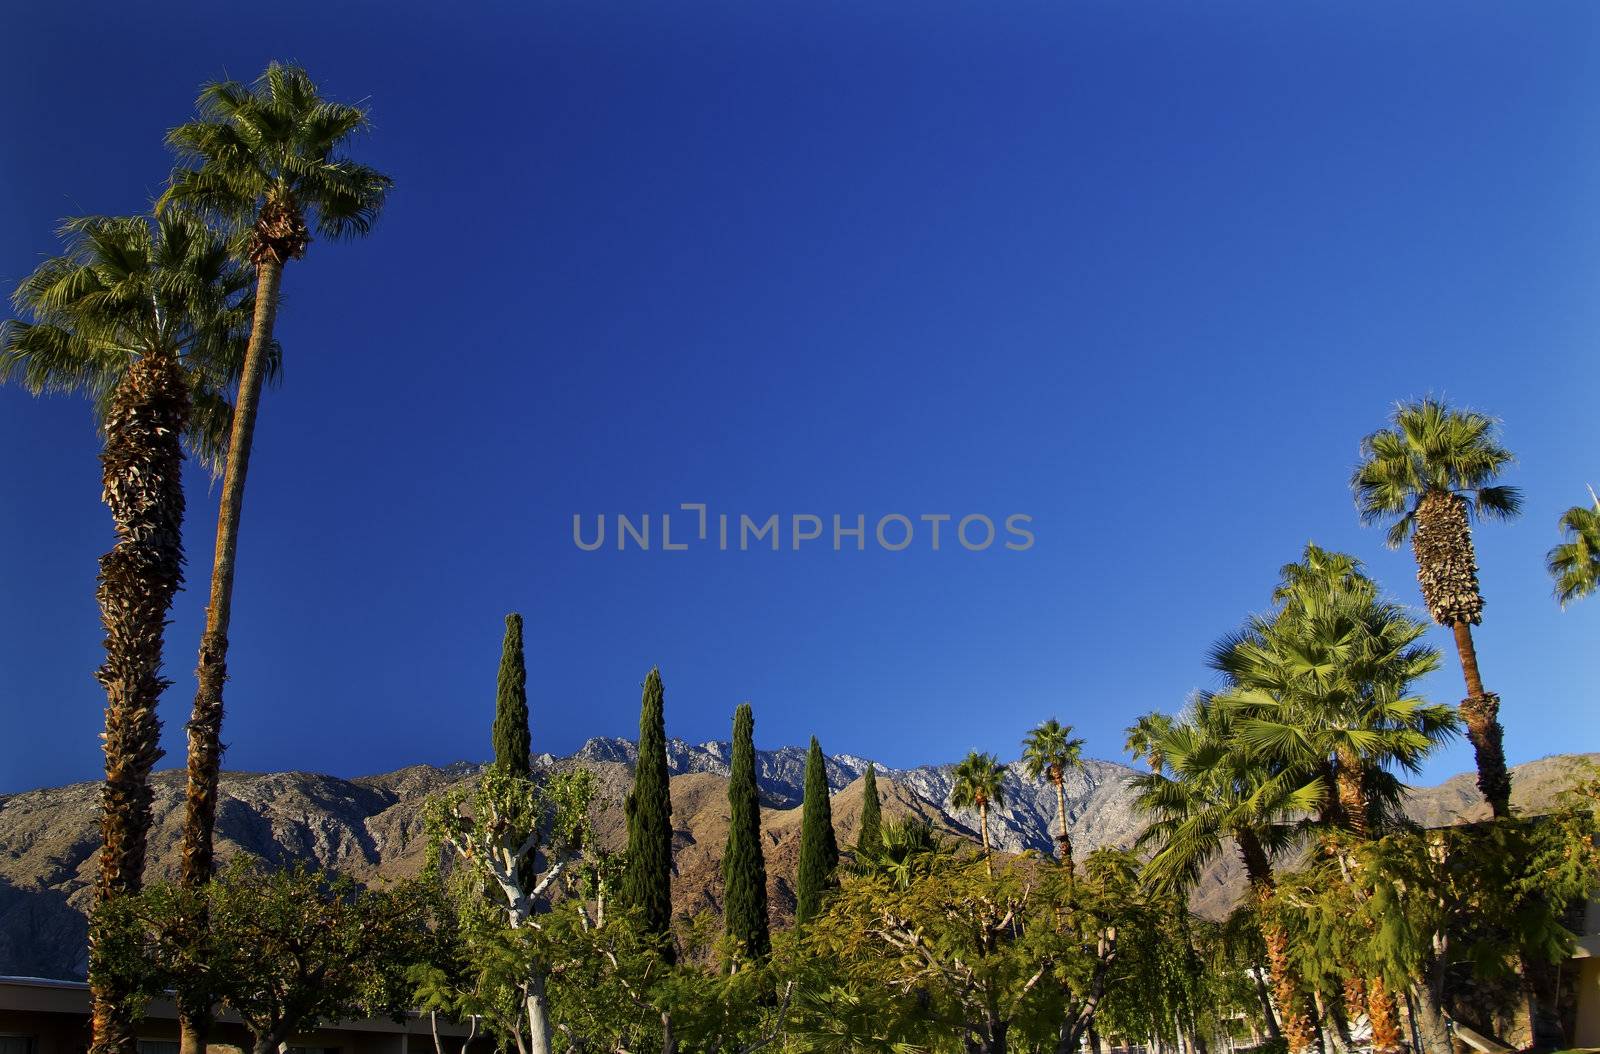 Fan Palms Trees Palm Springs California by bill_perry